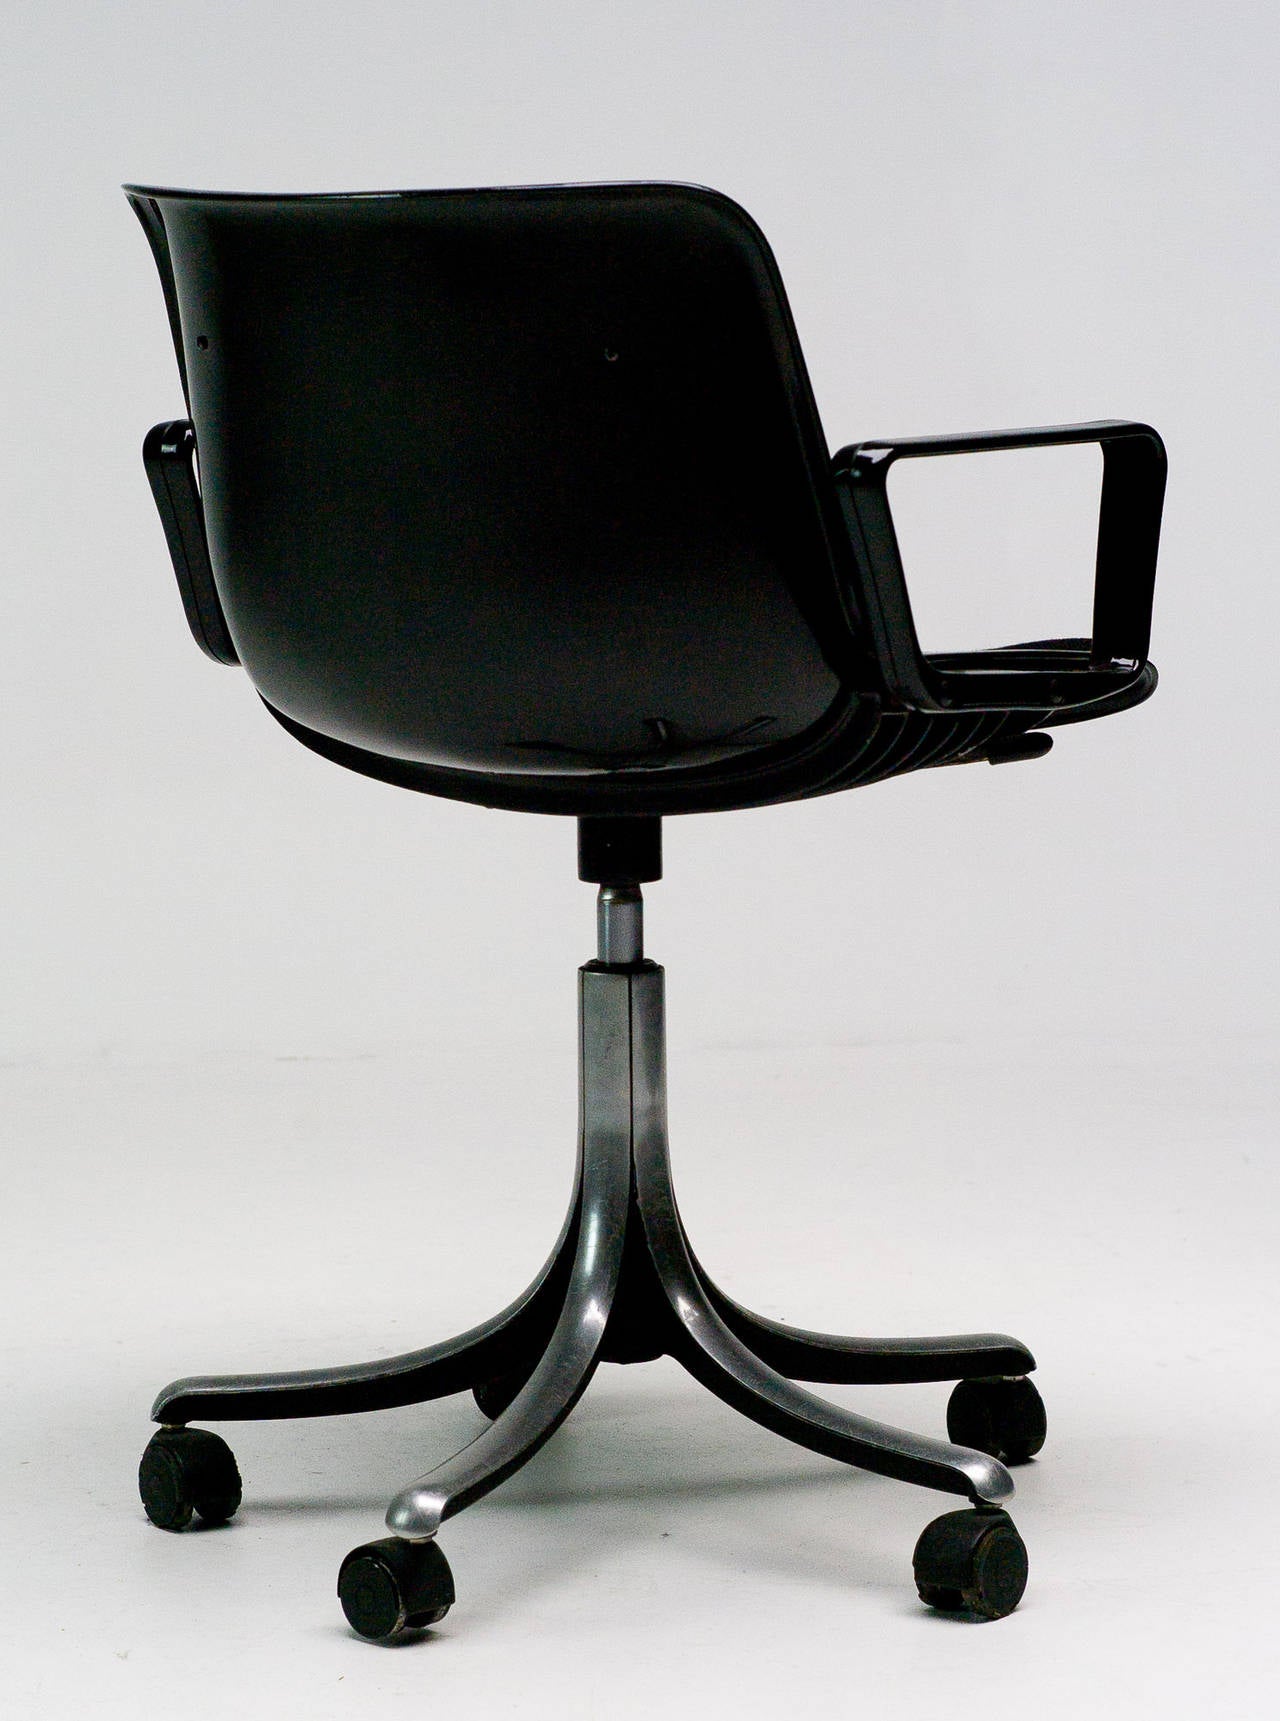 This elegant back chair with black fabric upholstery is height adjustable, has wheels and swivels.
Competitive worldwide shipping available. Please ask for our in-house crating and shipping services.